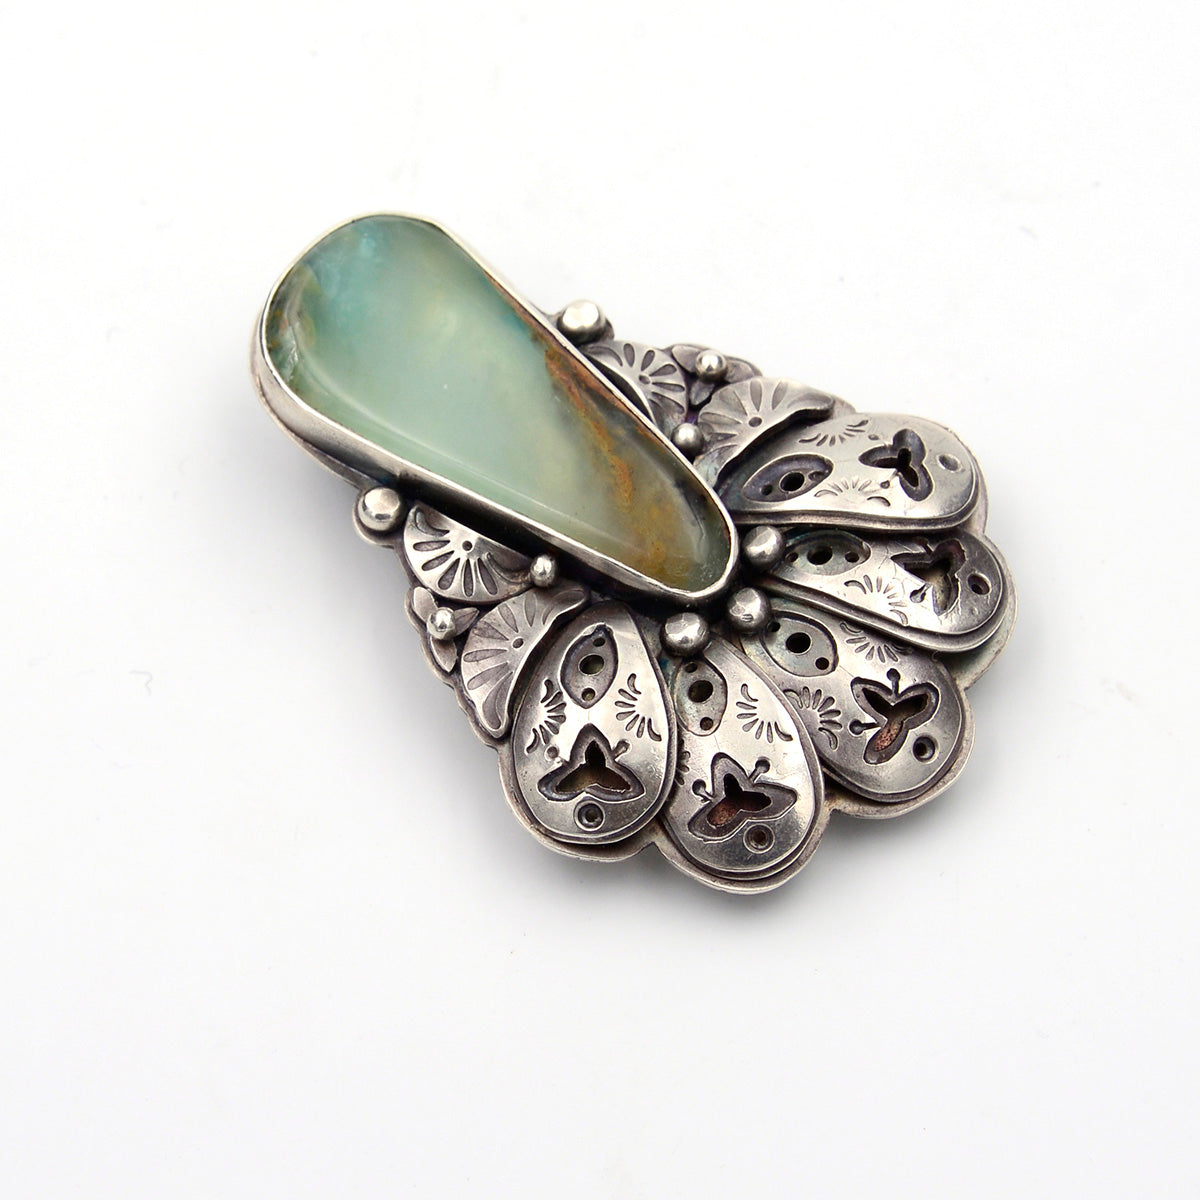 Together - Peruvian Opals & Sterling Silver Pendant Brooch - Faith Collection